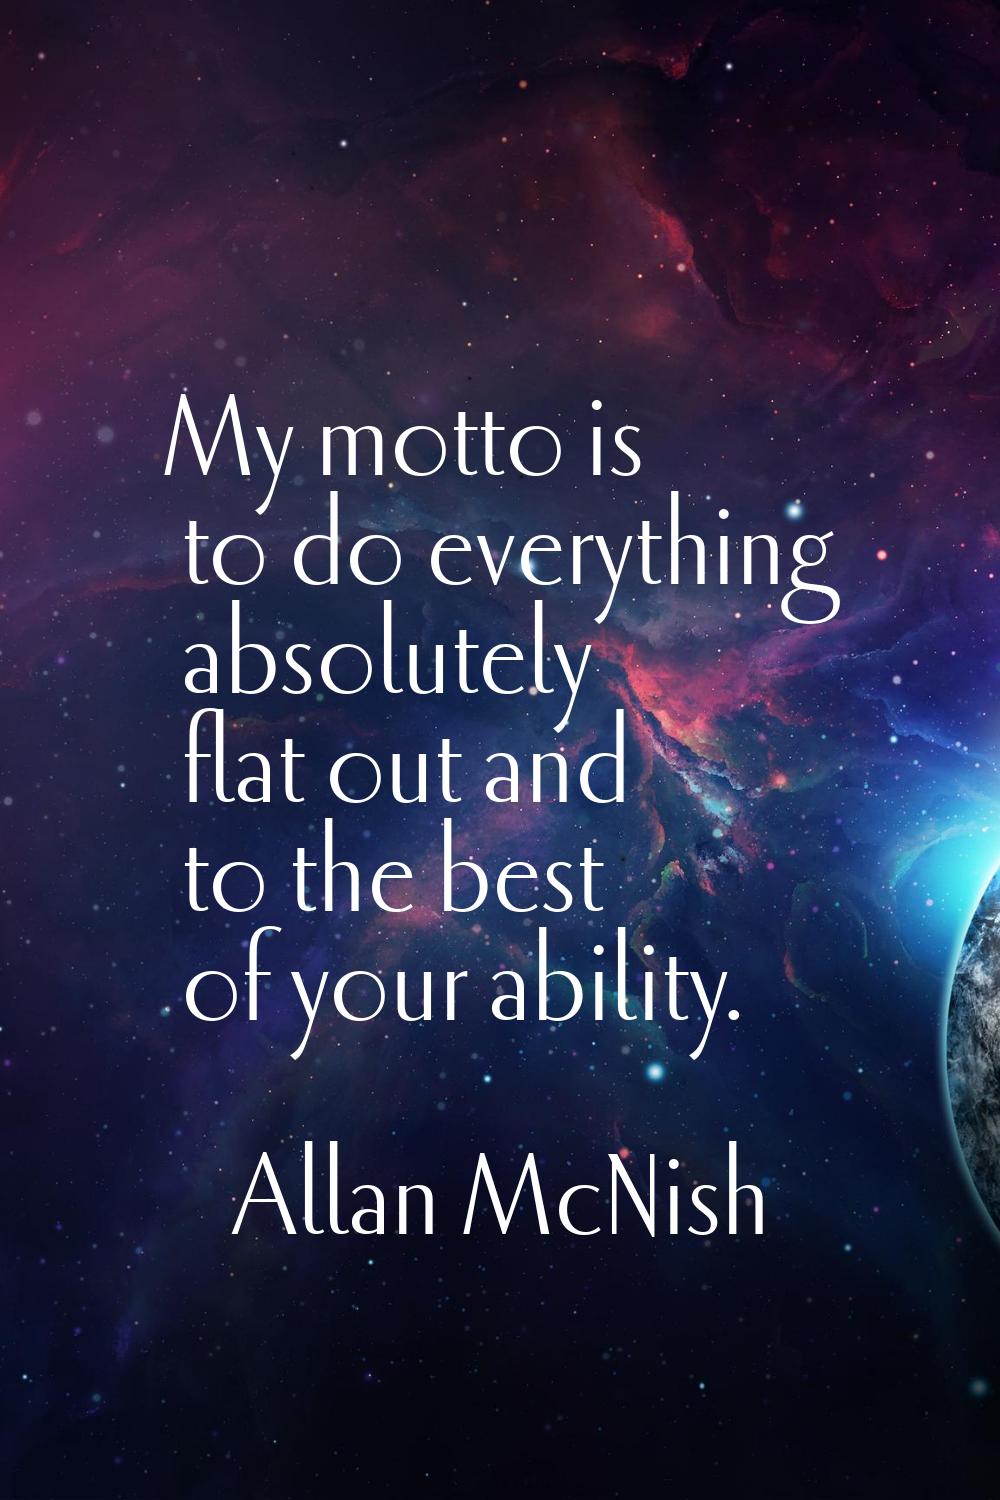 My motto is to do everything absolutely flat out and to the best of your ability.